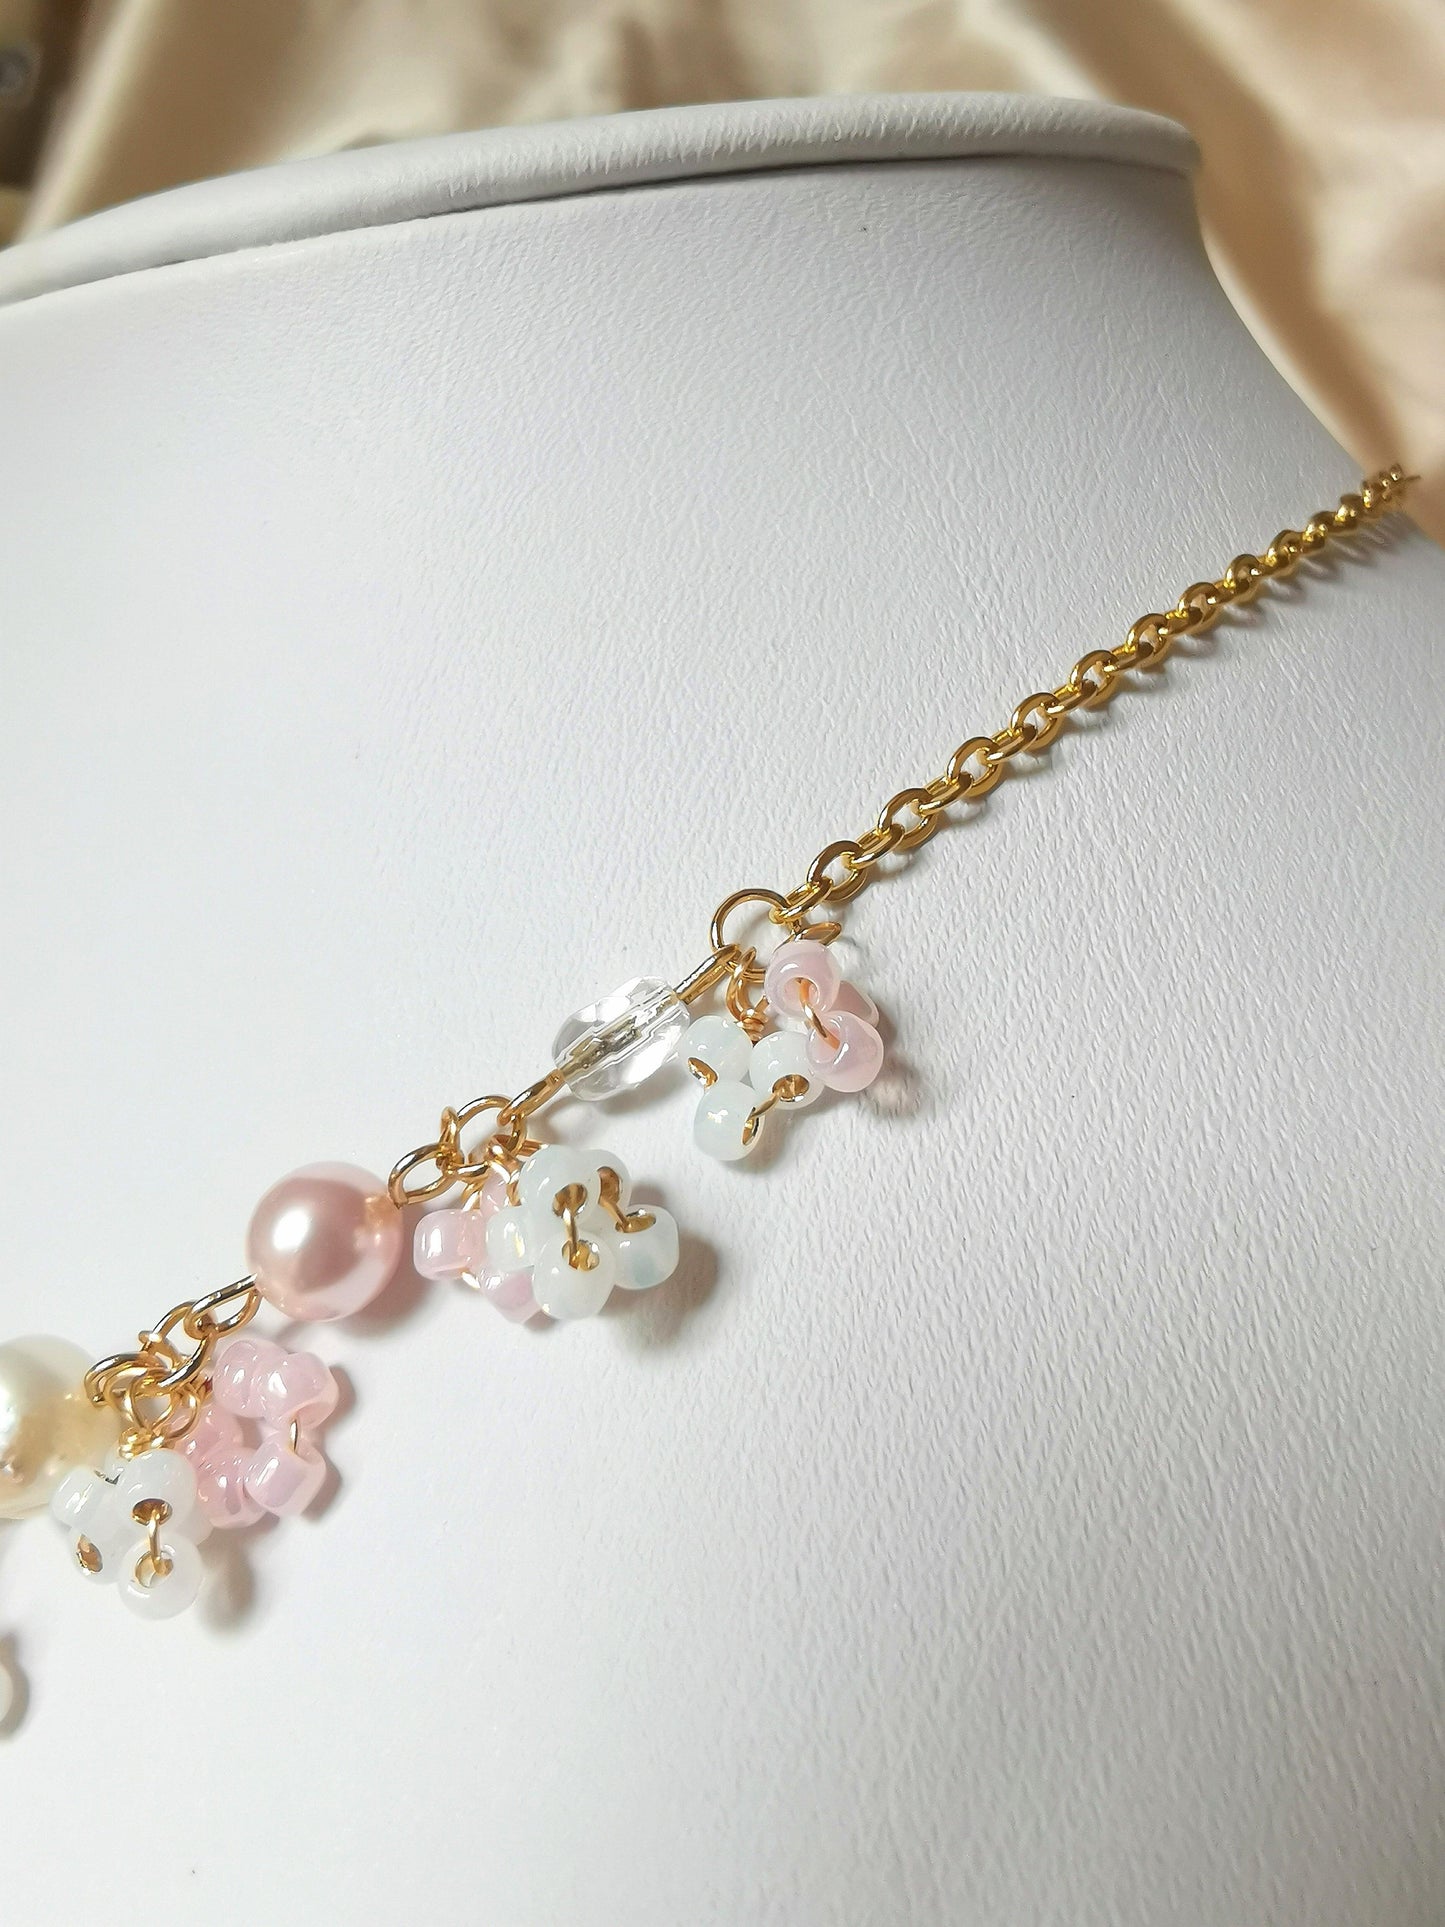 Sea Pink Rose Quartz and Pearl Necklace - By Cocoyu